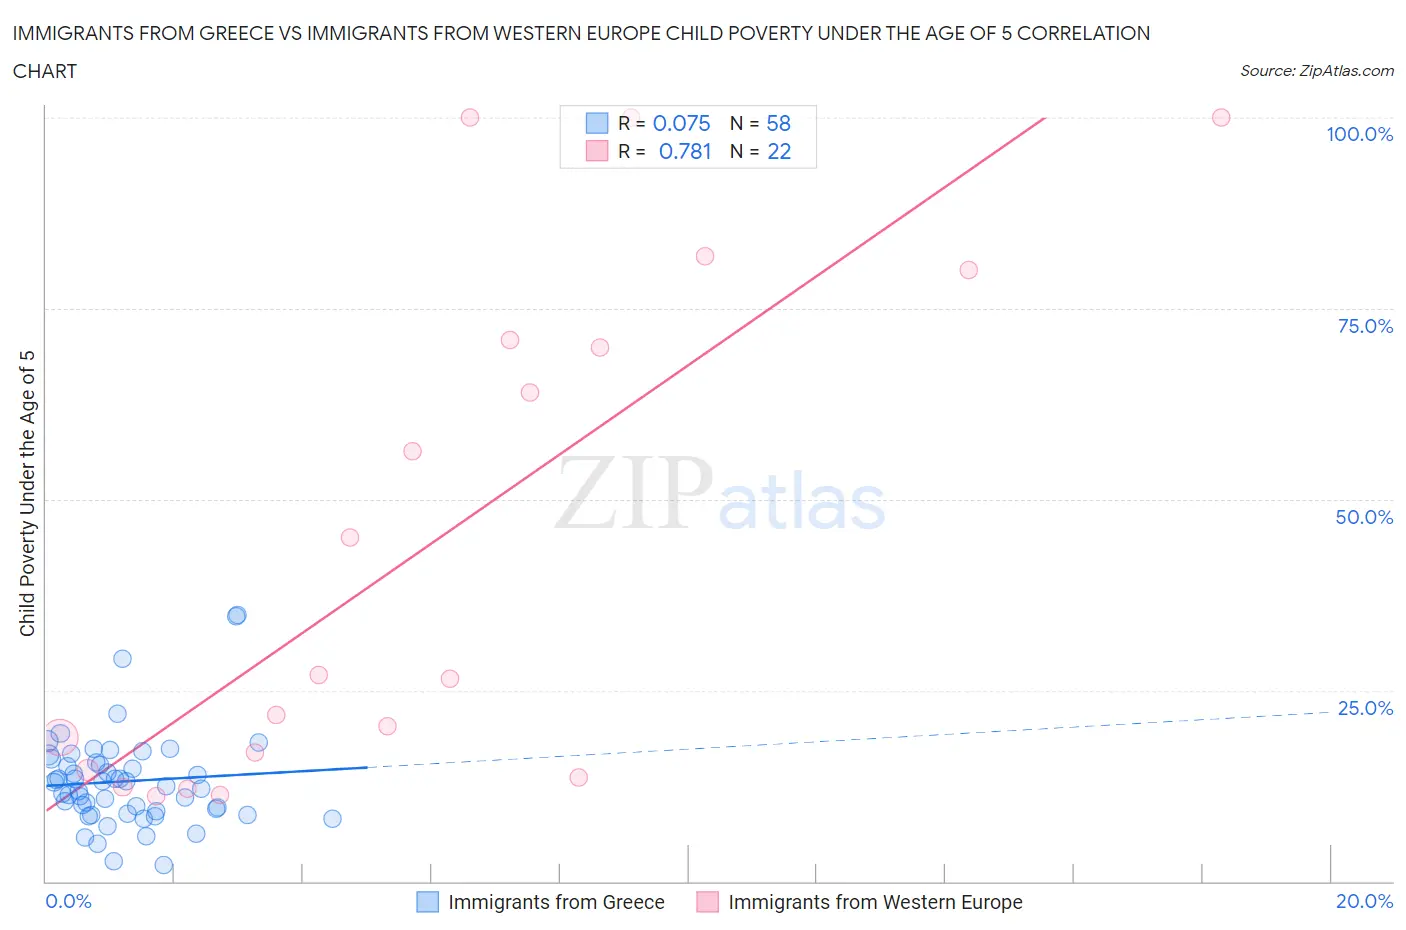 Immigrants from Greece vs Immigrants from Western Europe Child Poverty Under the Age of 5